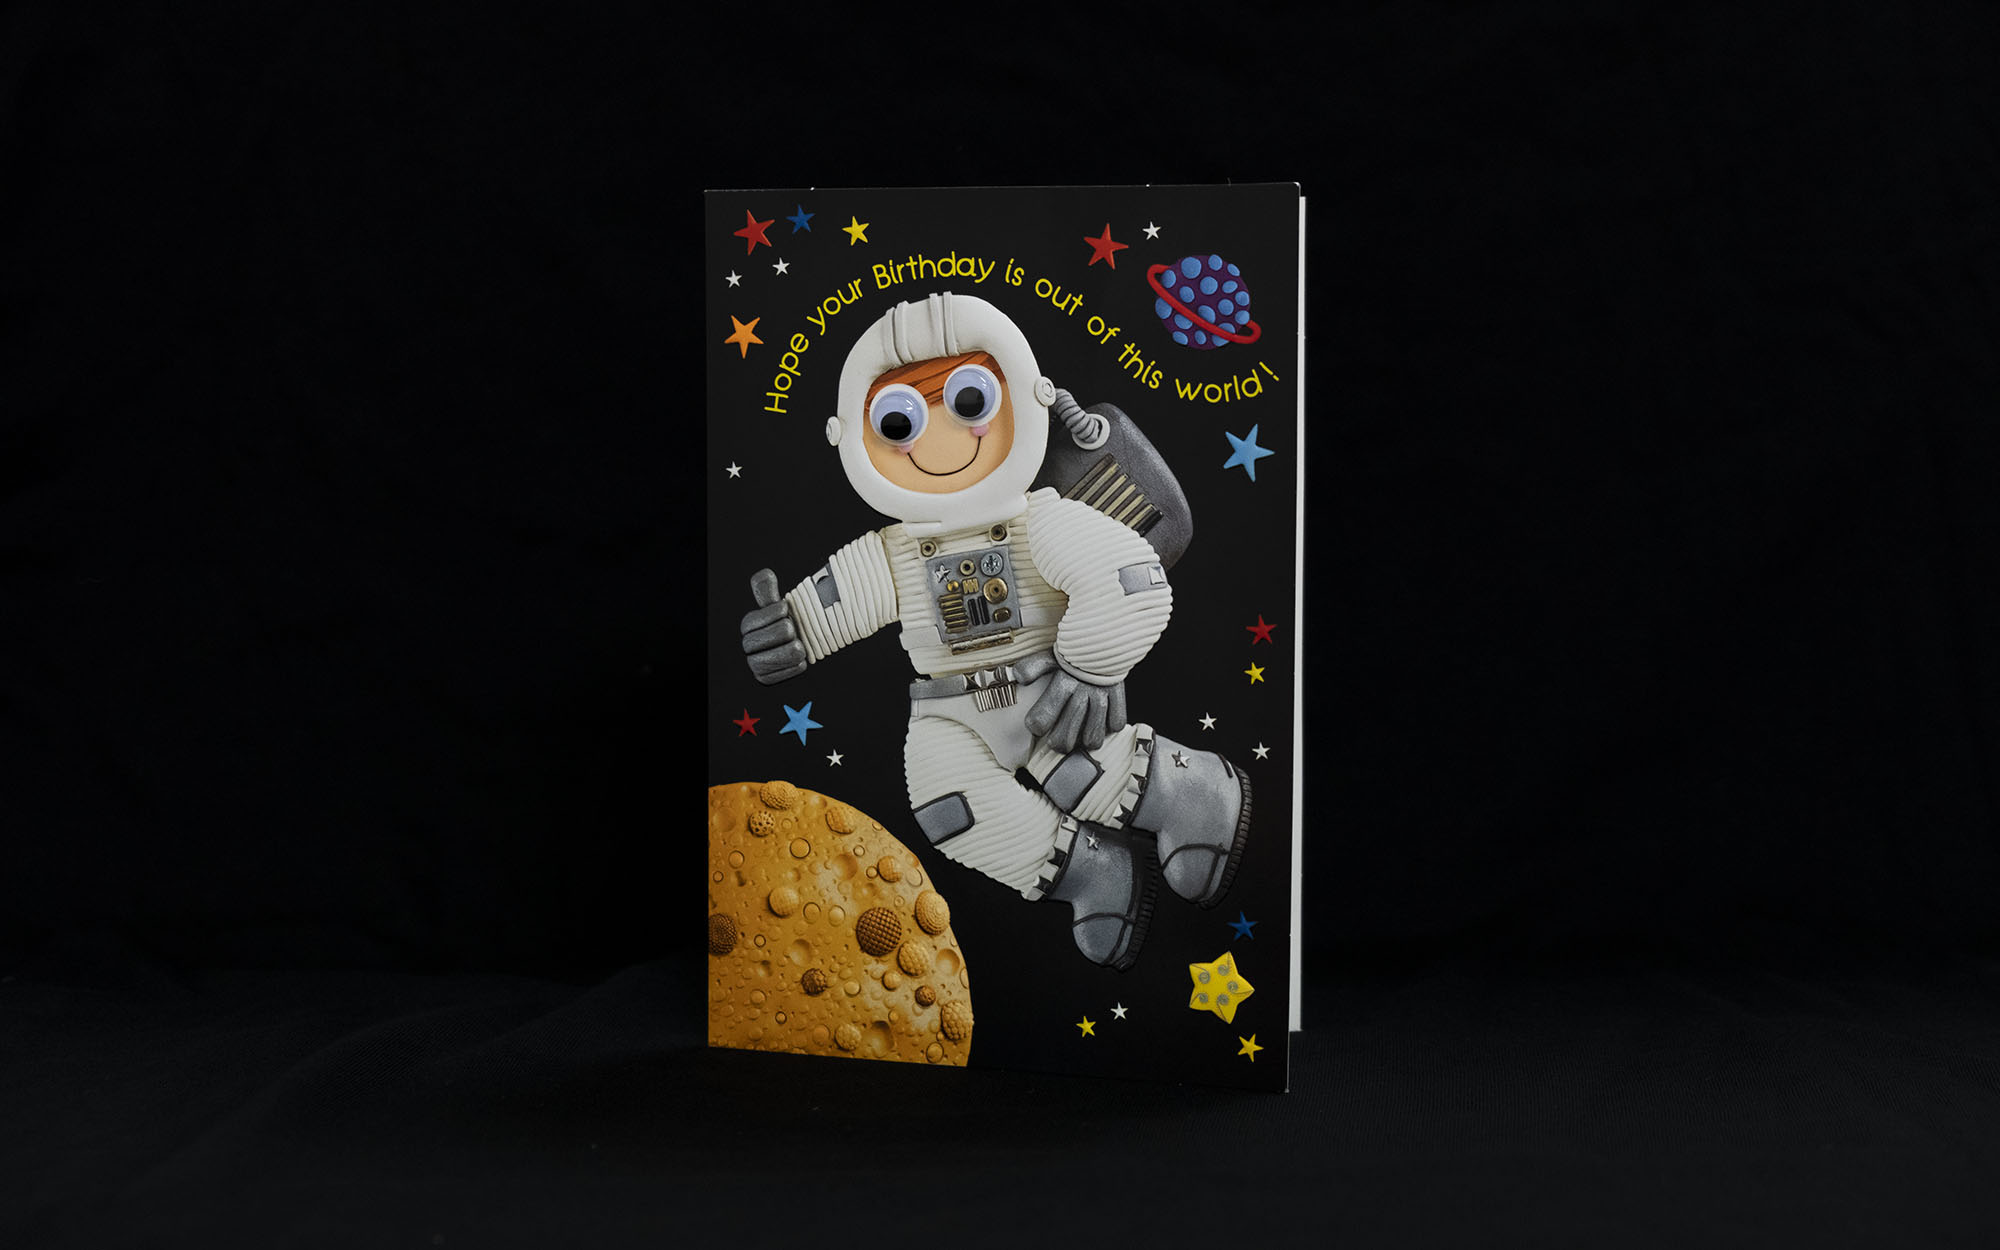 Birthday card with an astronaut on it and planets and stars. The card says "Hope your birthday is out of this world!"